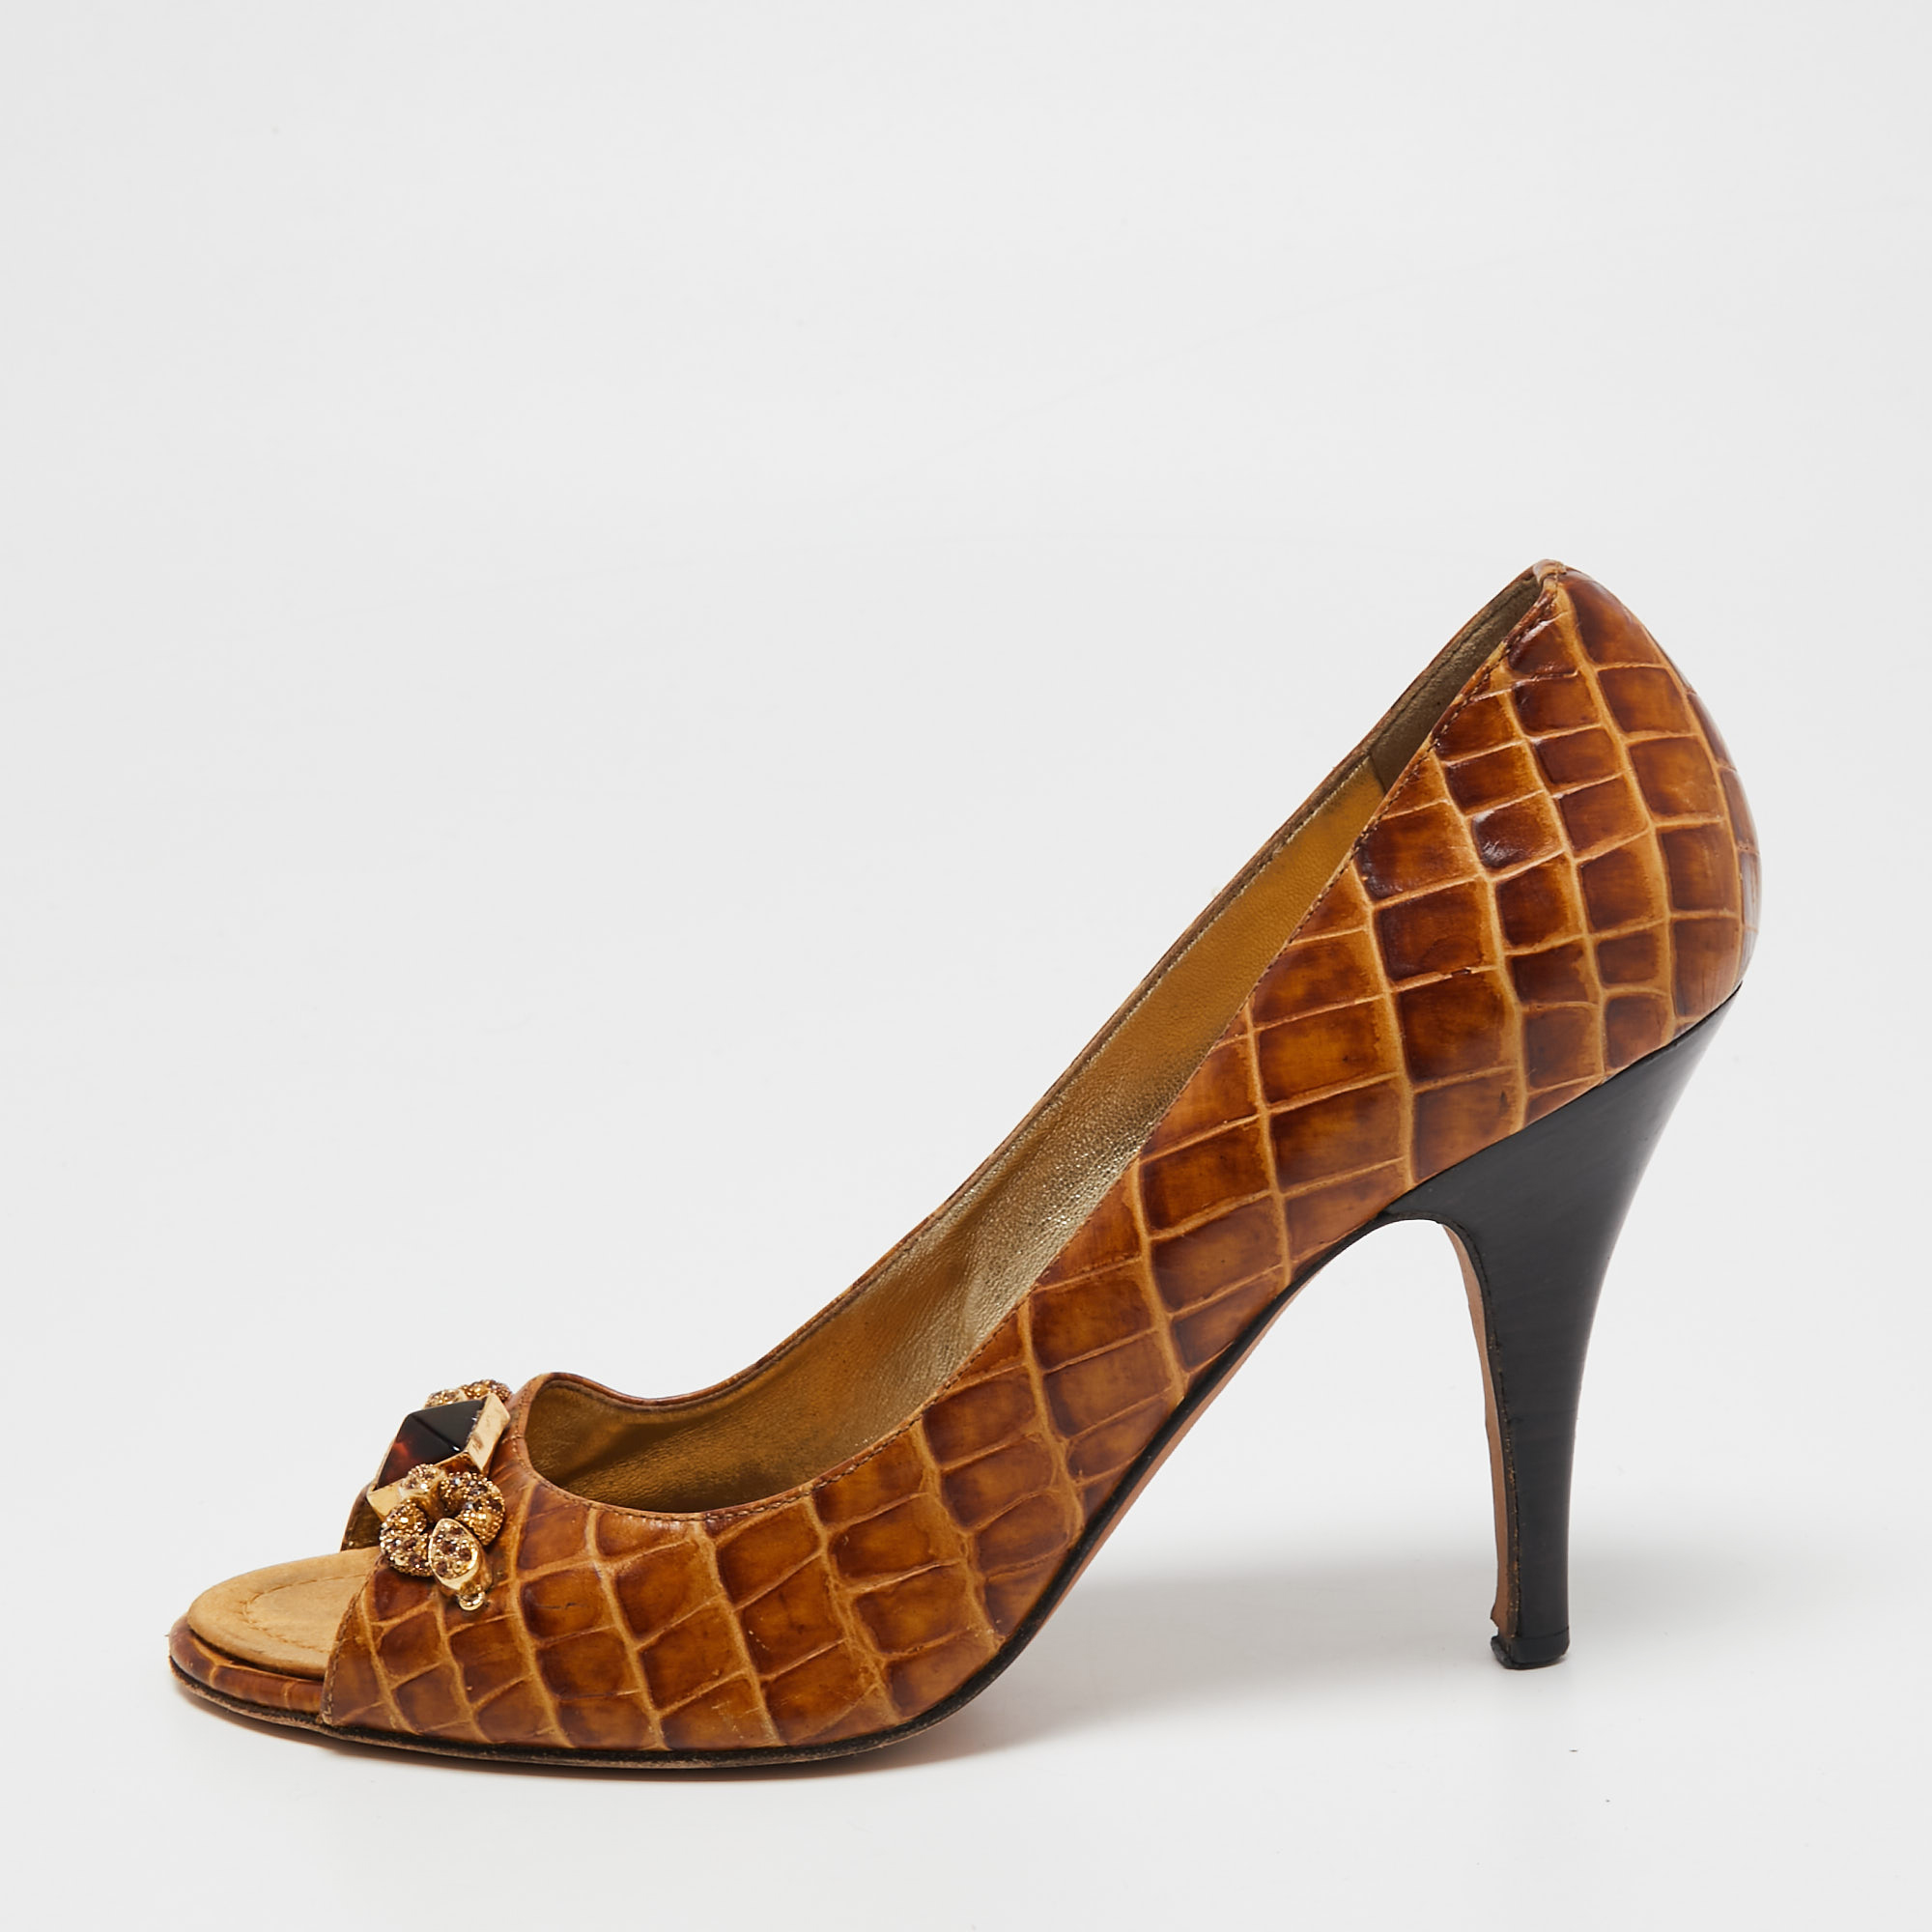 Pre-owned Giuseppe Zanotti Brown Croc Embossed Leather Embellished Open-toe Pumps Size 39.5